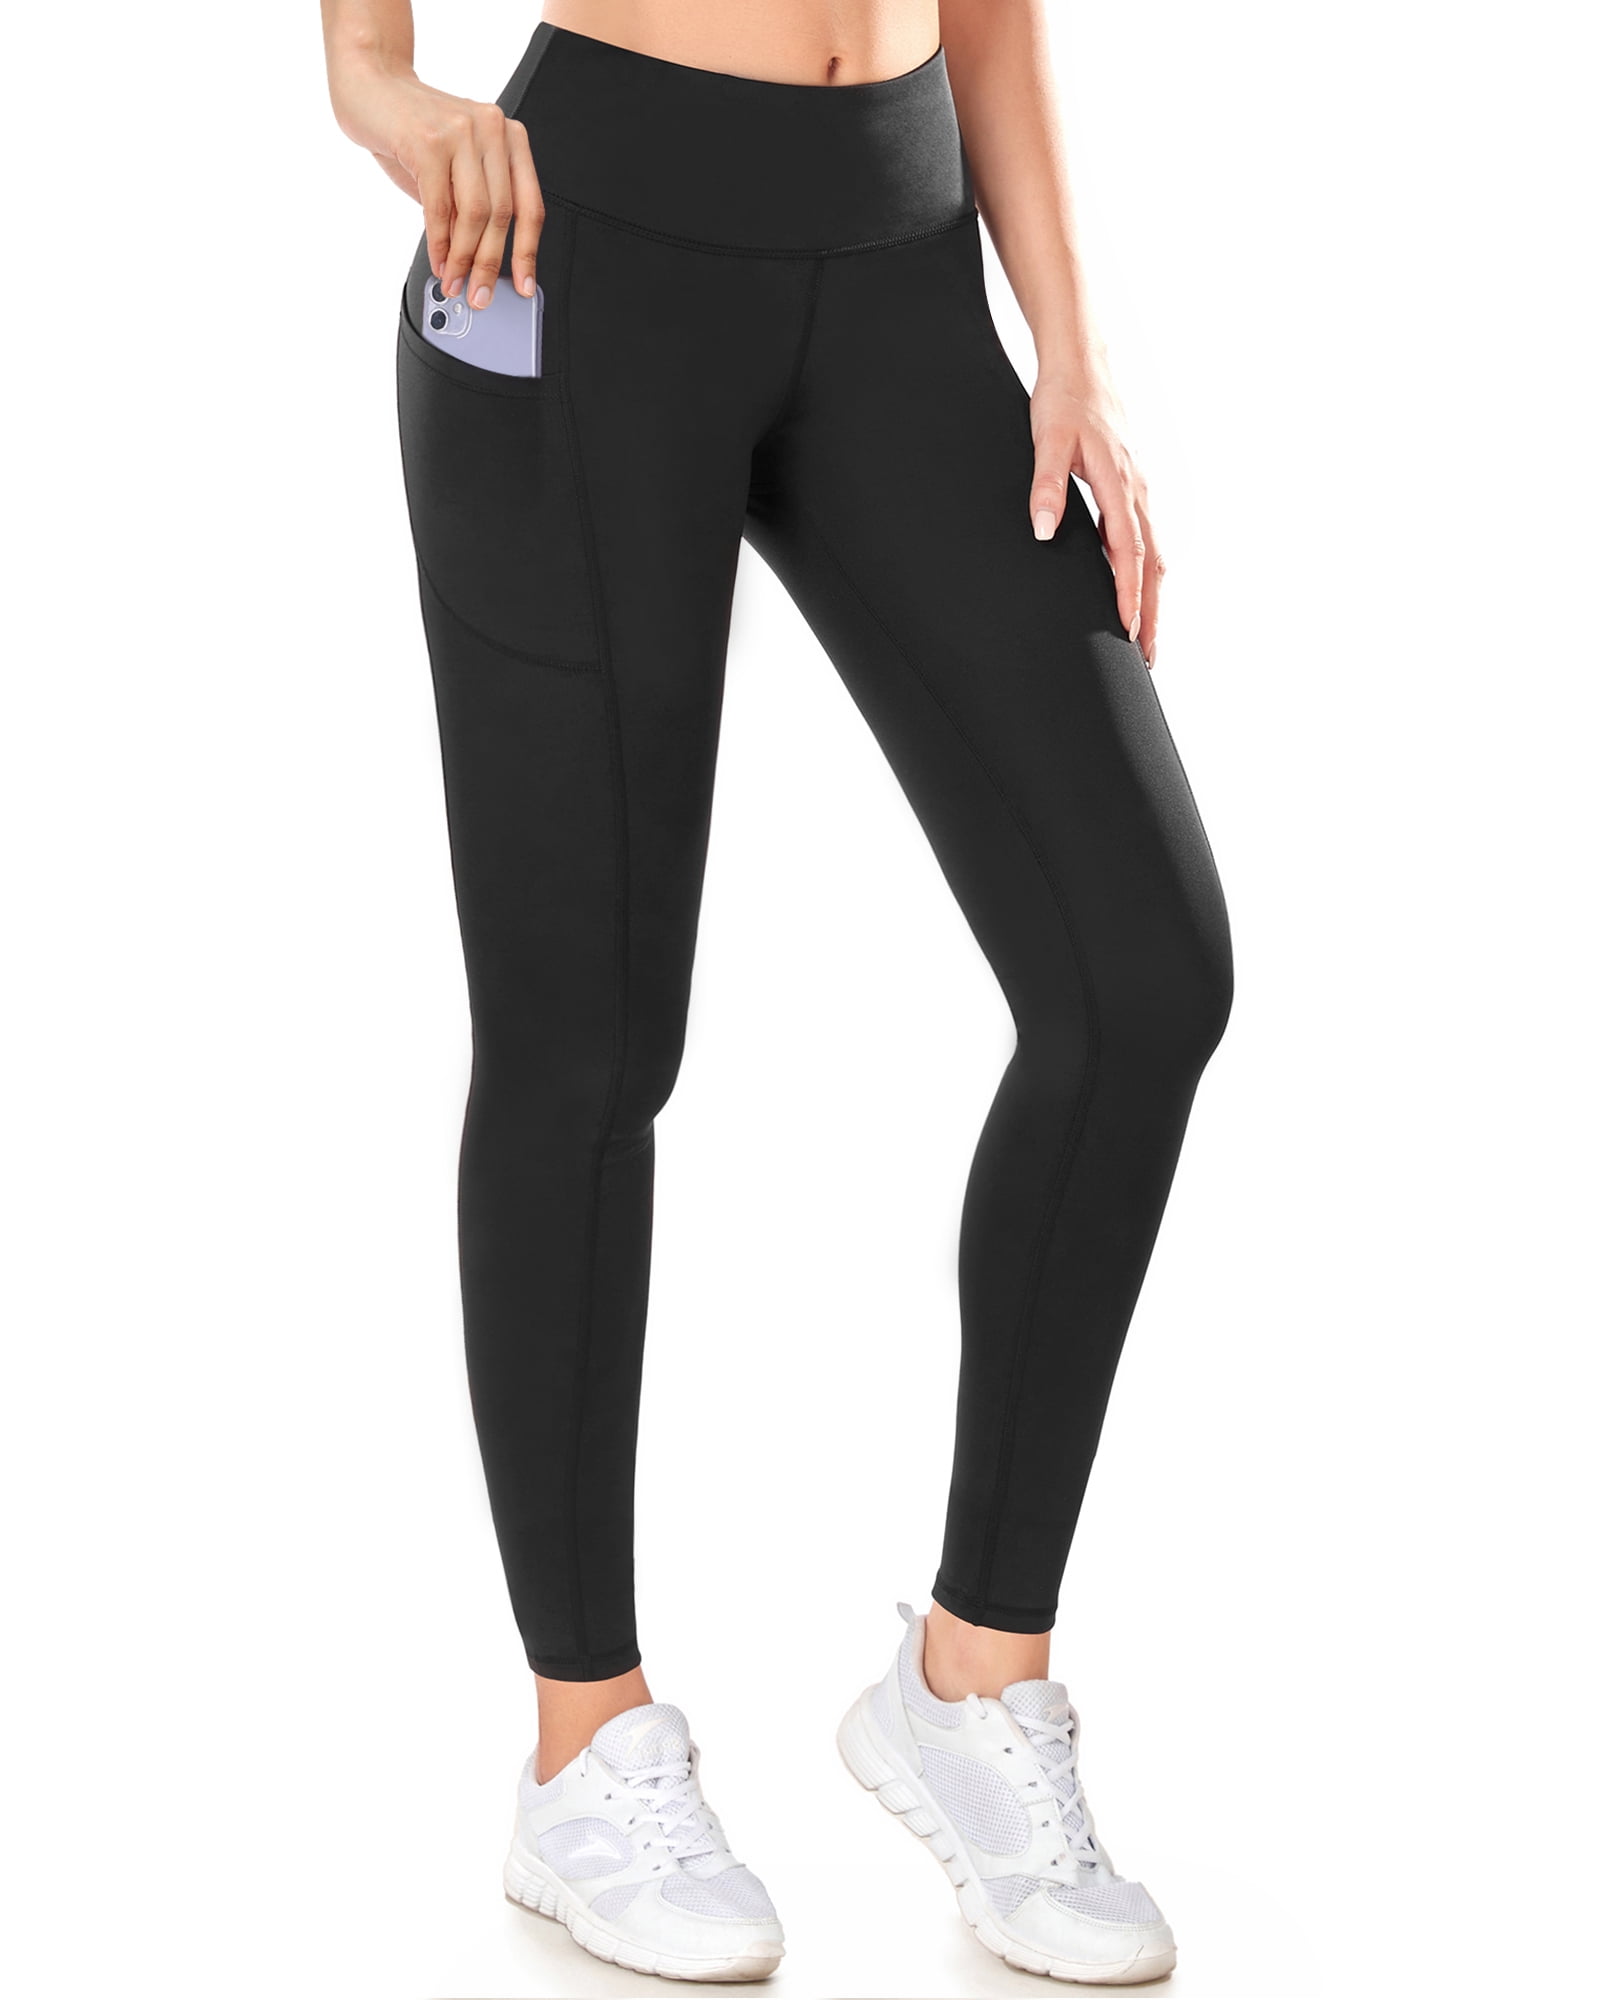 CAMBIVO Women's Leggings, Yoga Pants with Pockets, High Waist Workout ...